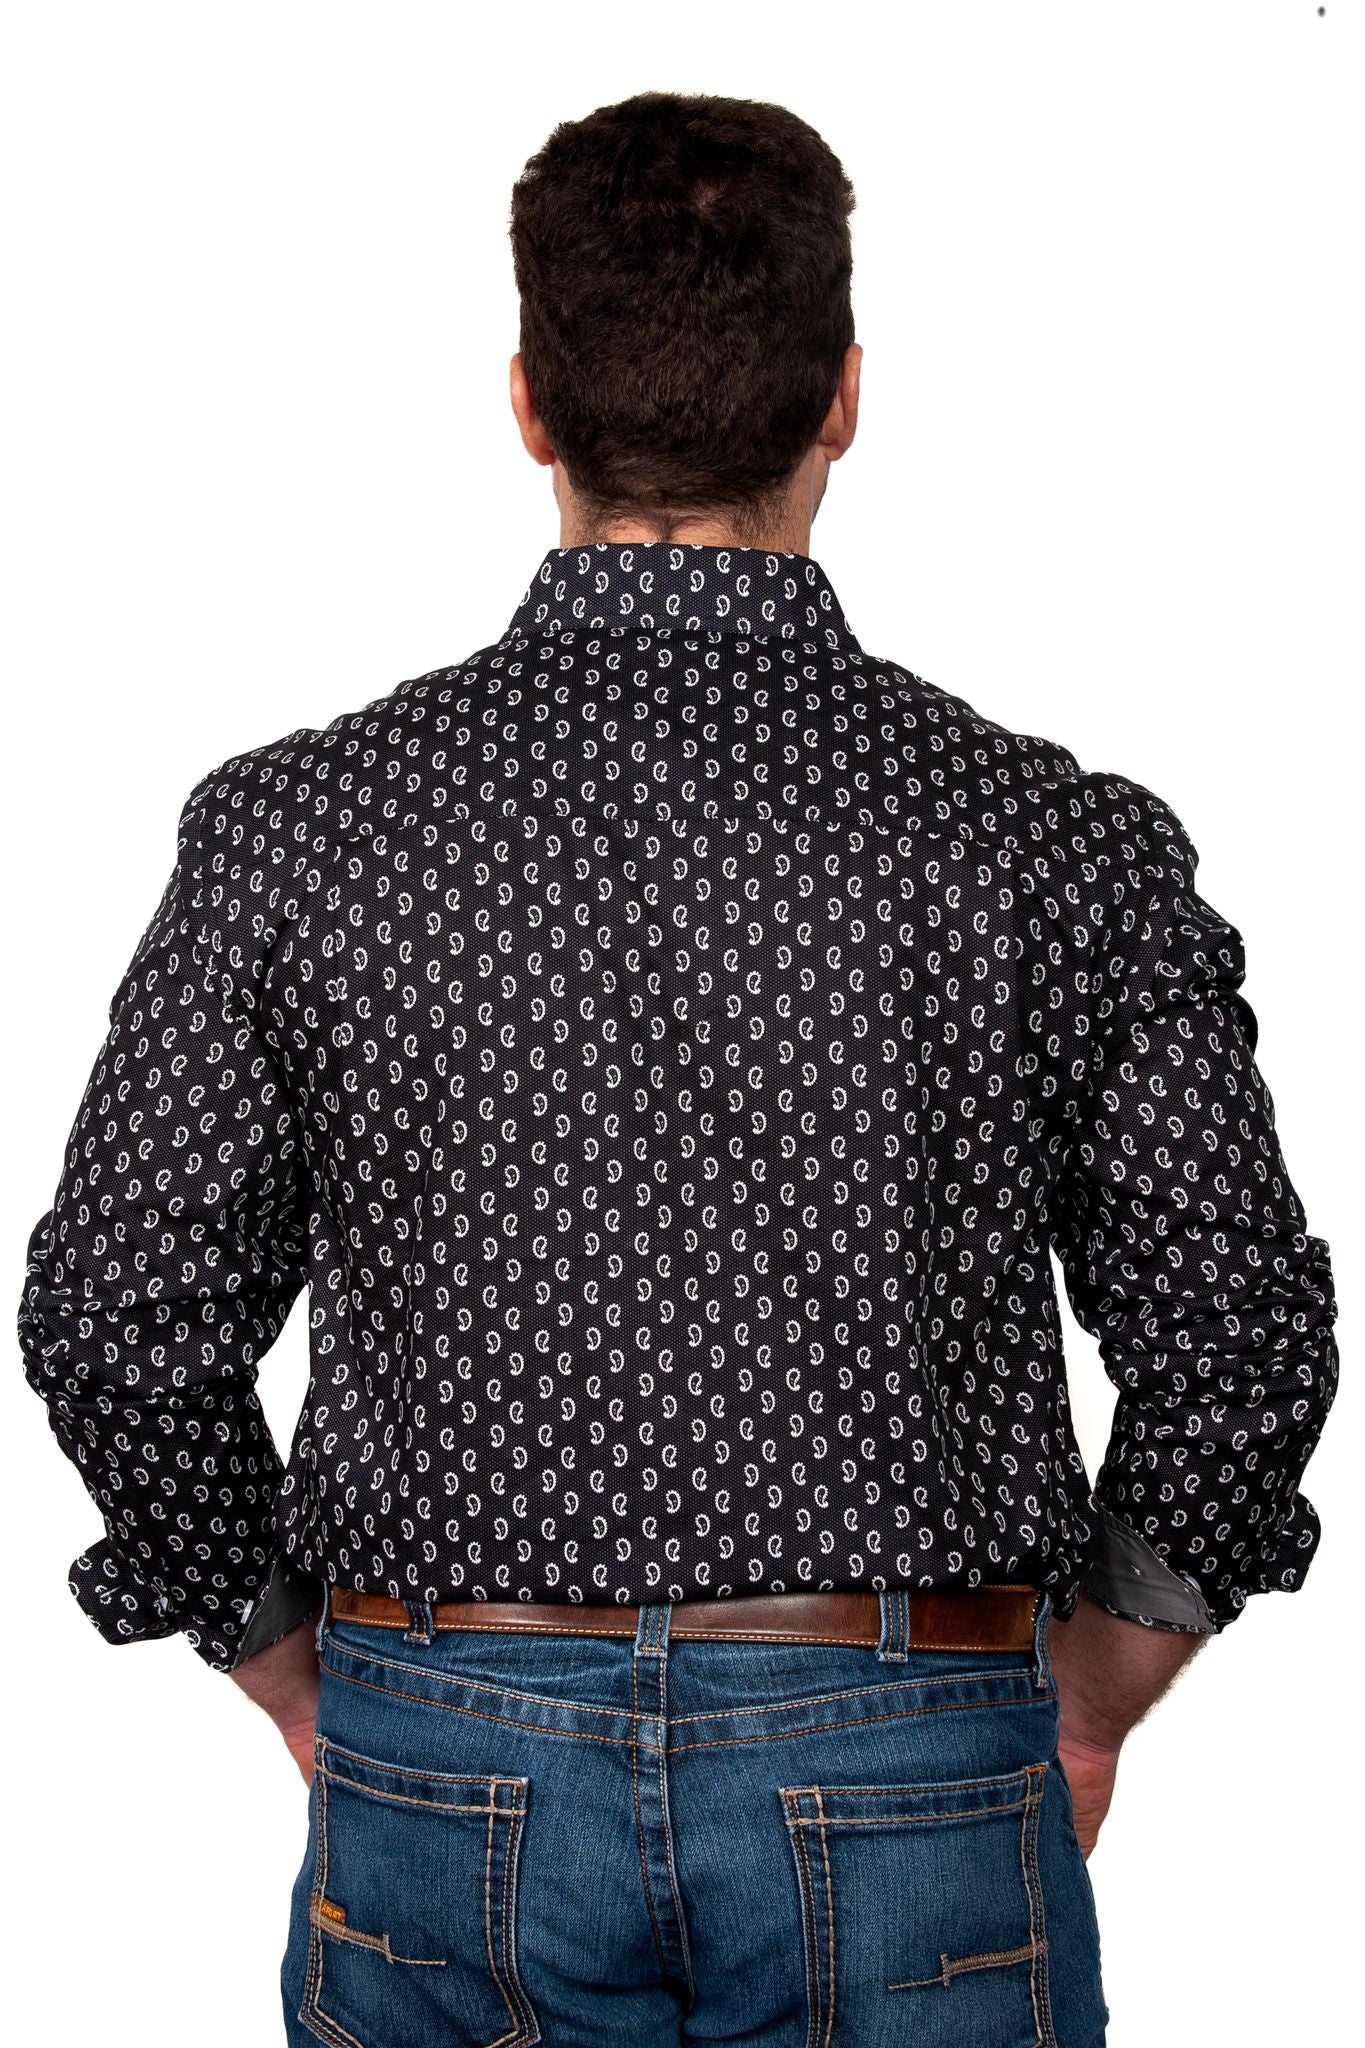 MWLS2032 Just Country Men's Austin Shirt